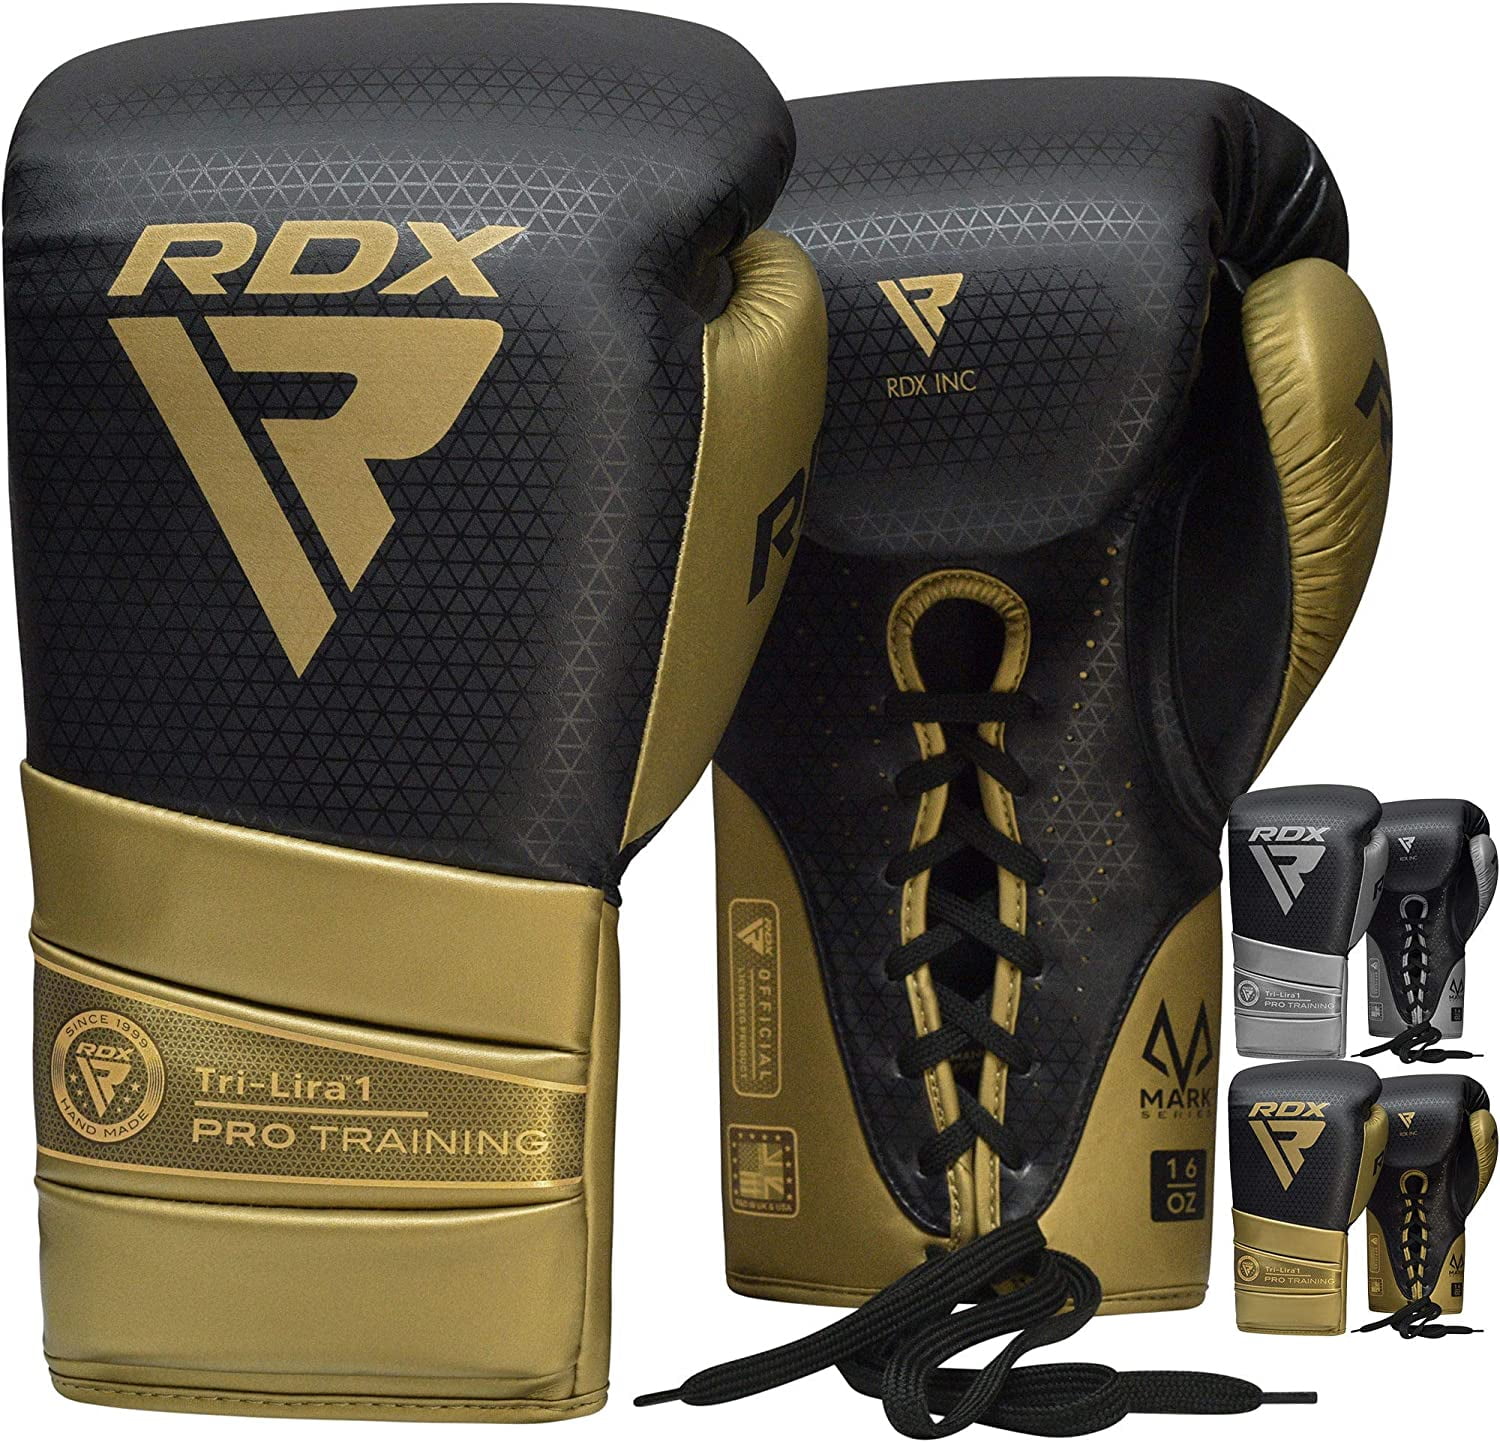 RDX Boxing Gloves Training Muay Thai Sparring Kickboxing Mitts Fighting Punching 